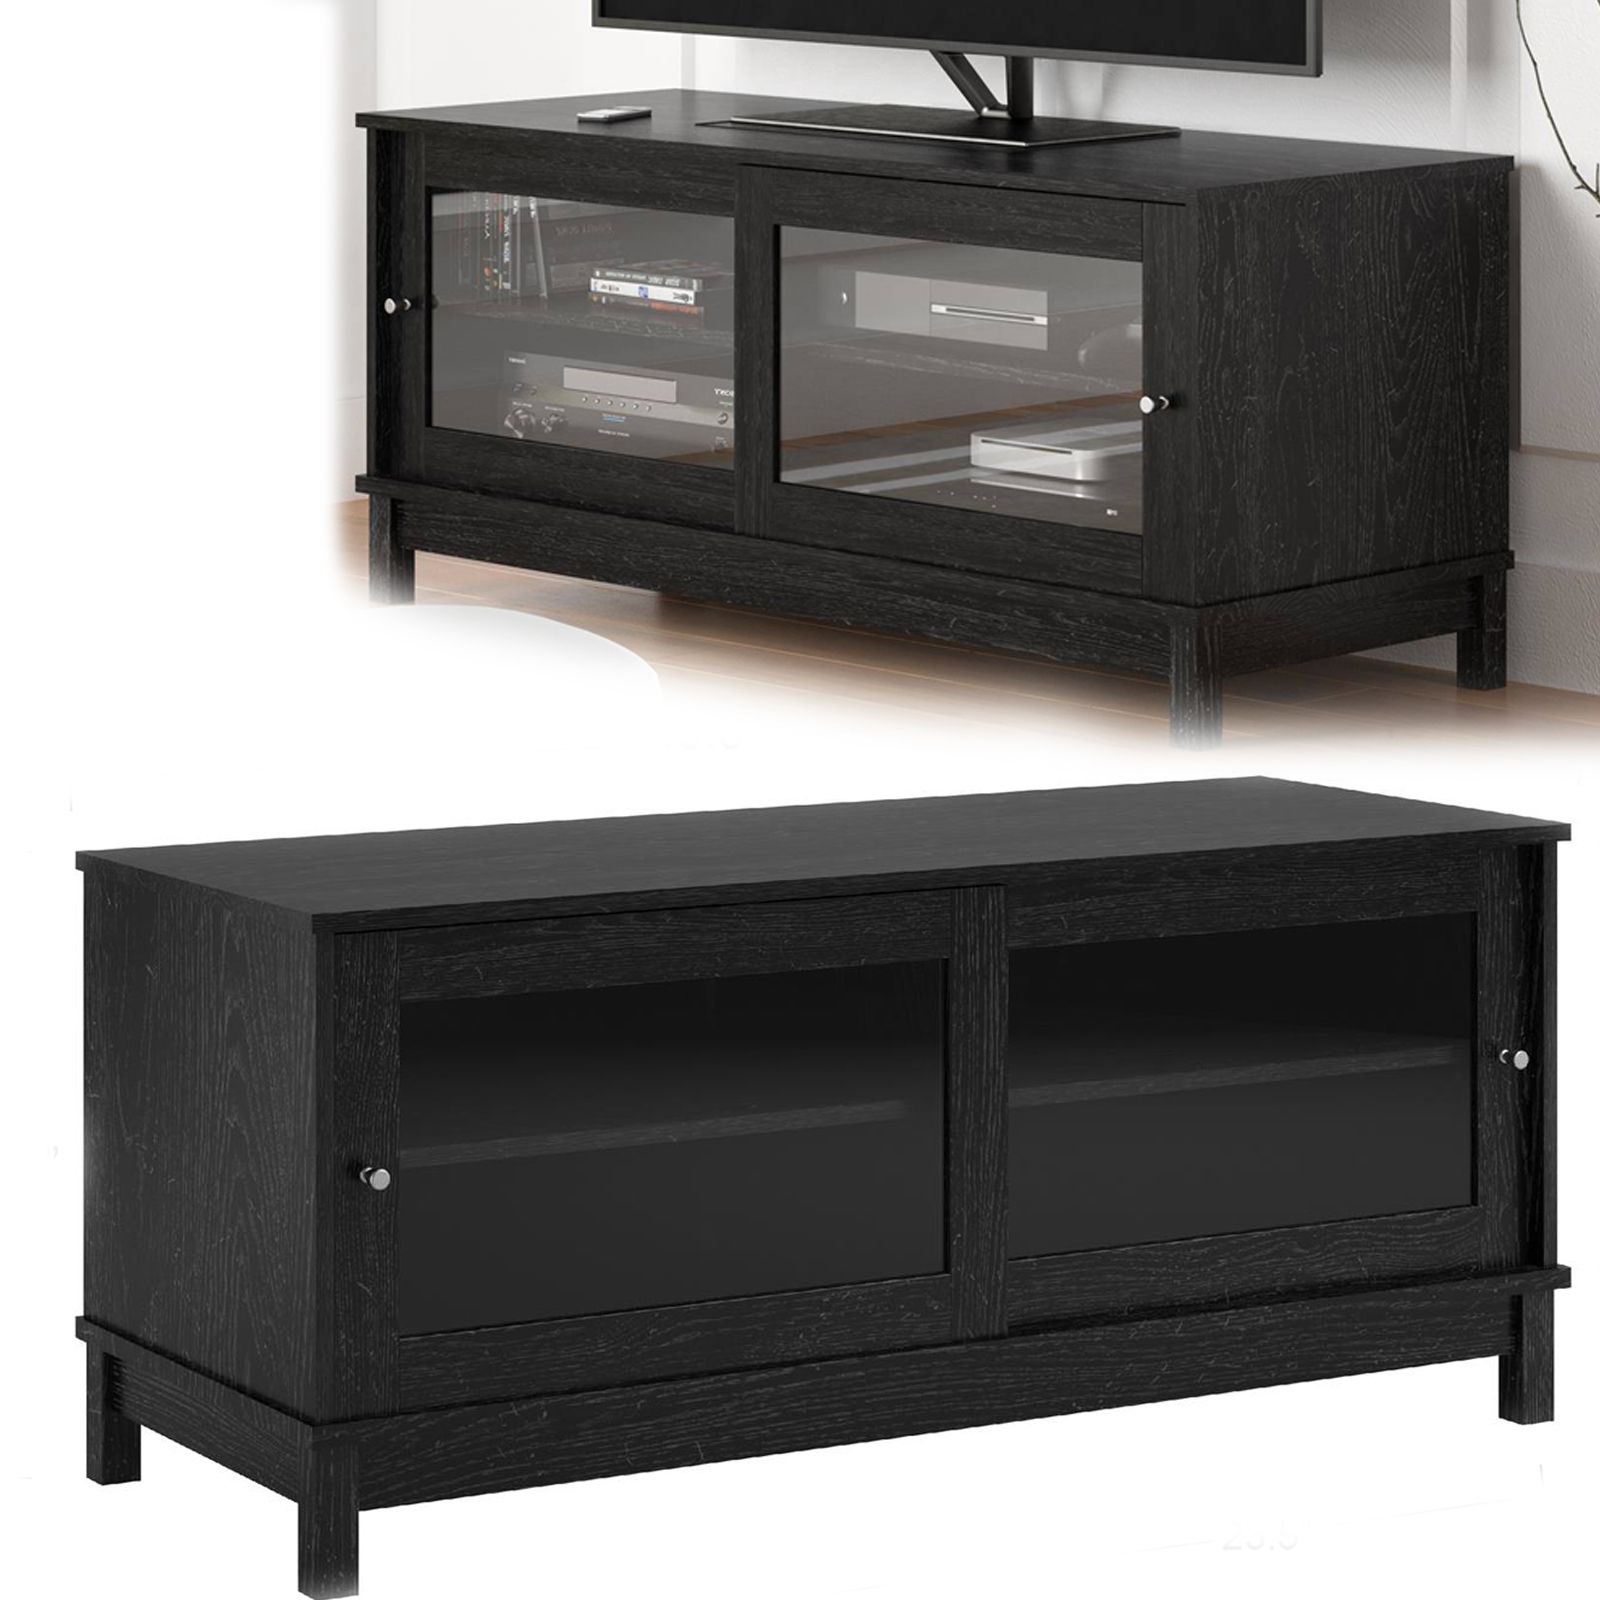 Tv Stand Entertainment Center Media 55 Inch Console Table With 2 Regarding Preferred Entertainment Center Tv Stands (View 5 of 20)